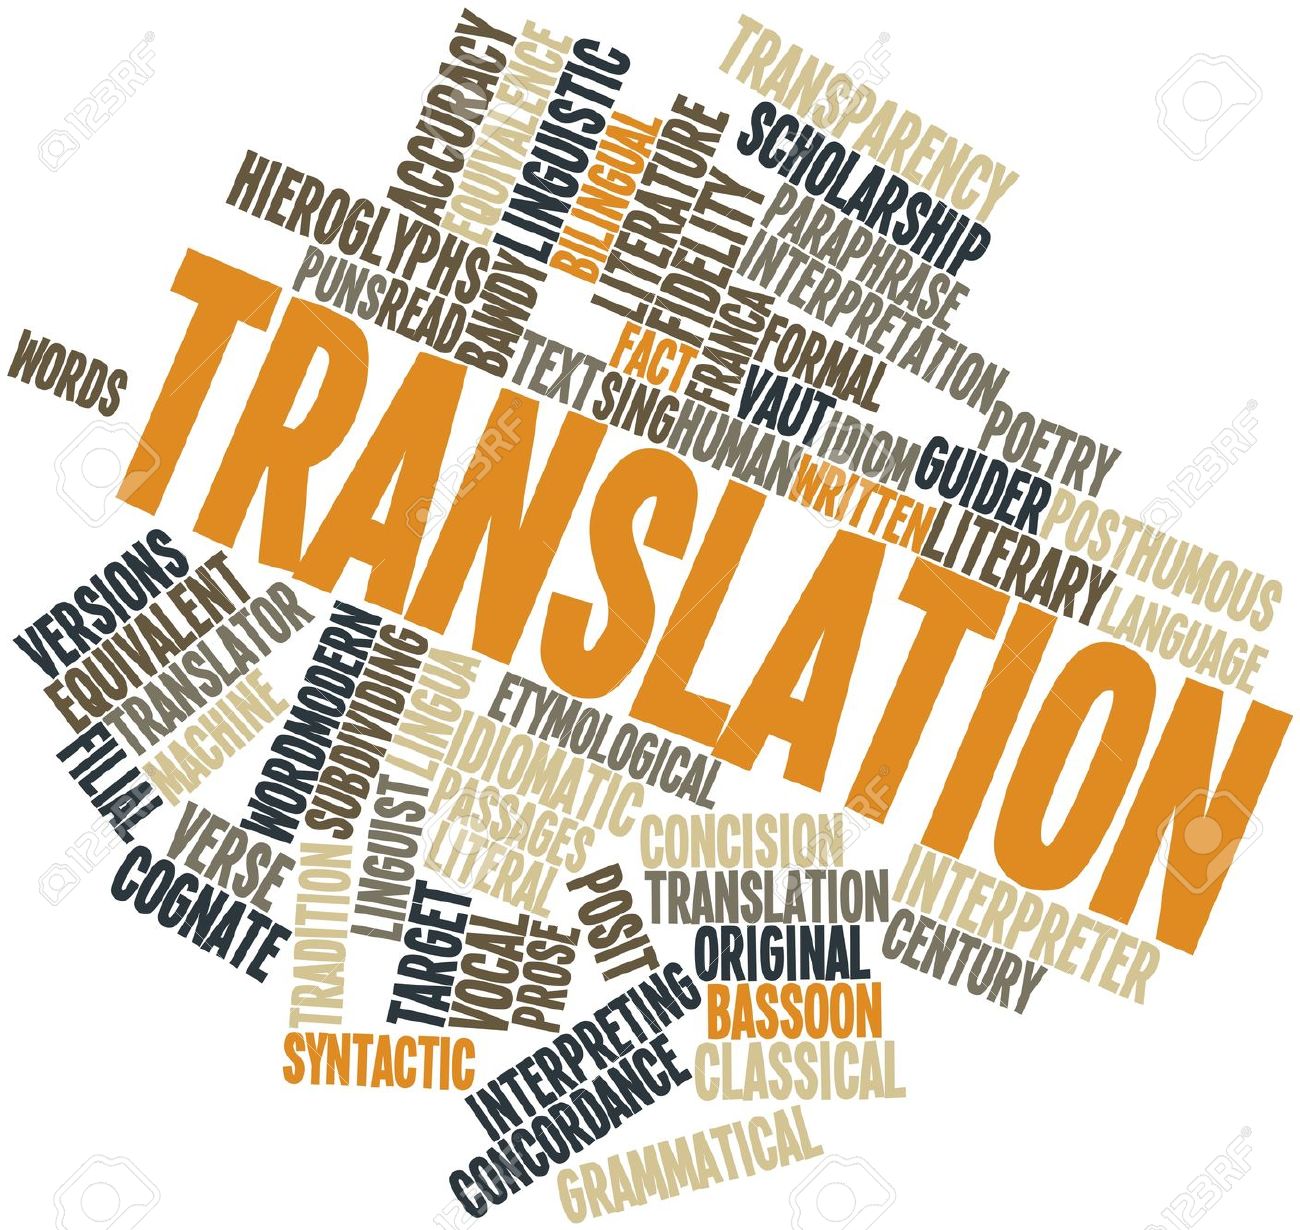  Translate Words And Articles From English To Spanish